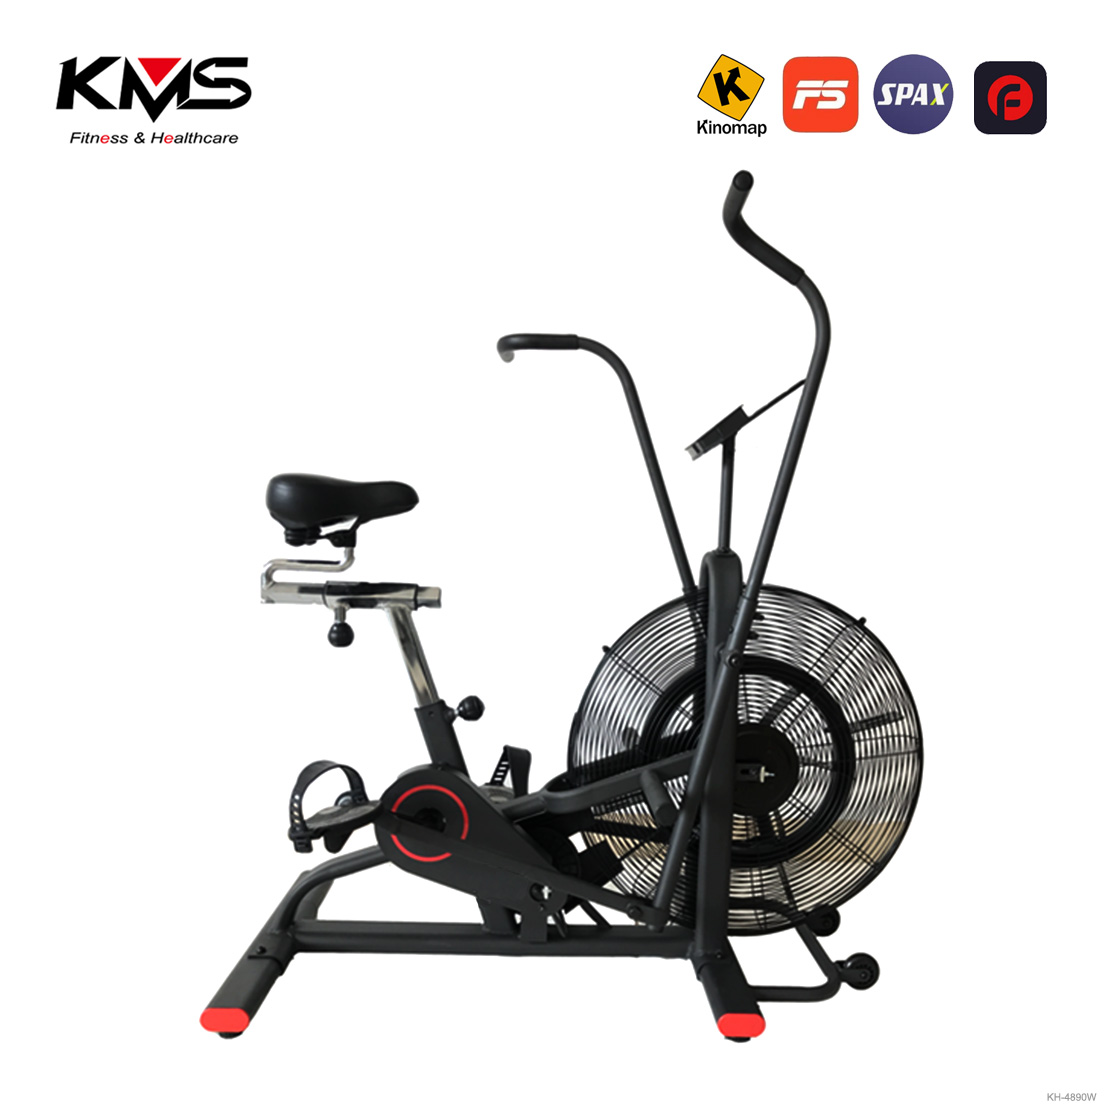 Upright Fan Bike with Adjustable Seat and Handlebars for HIIT and Cardio Training